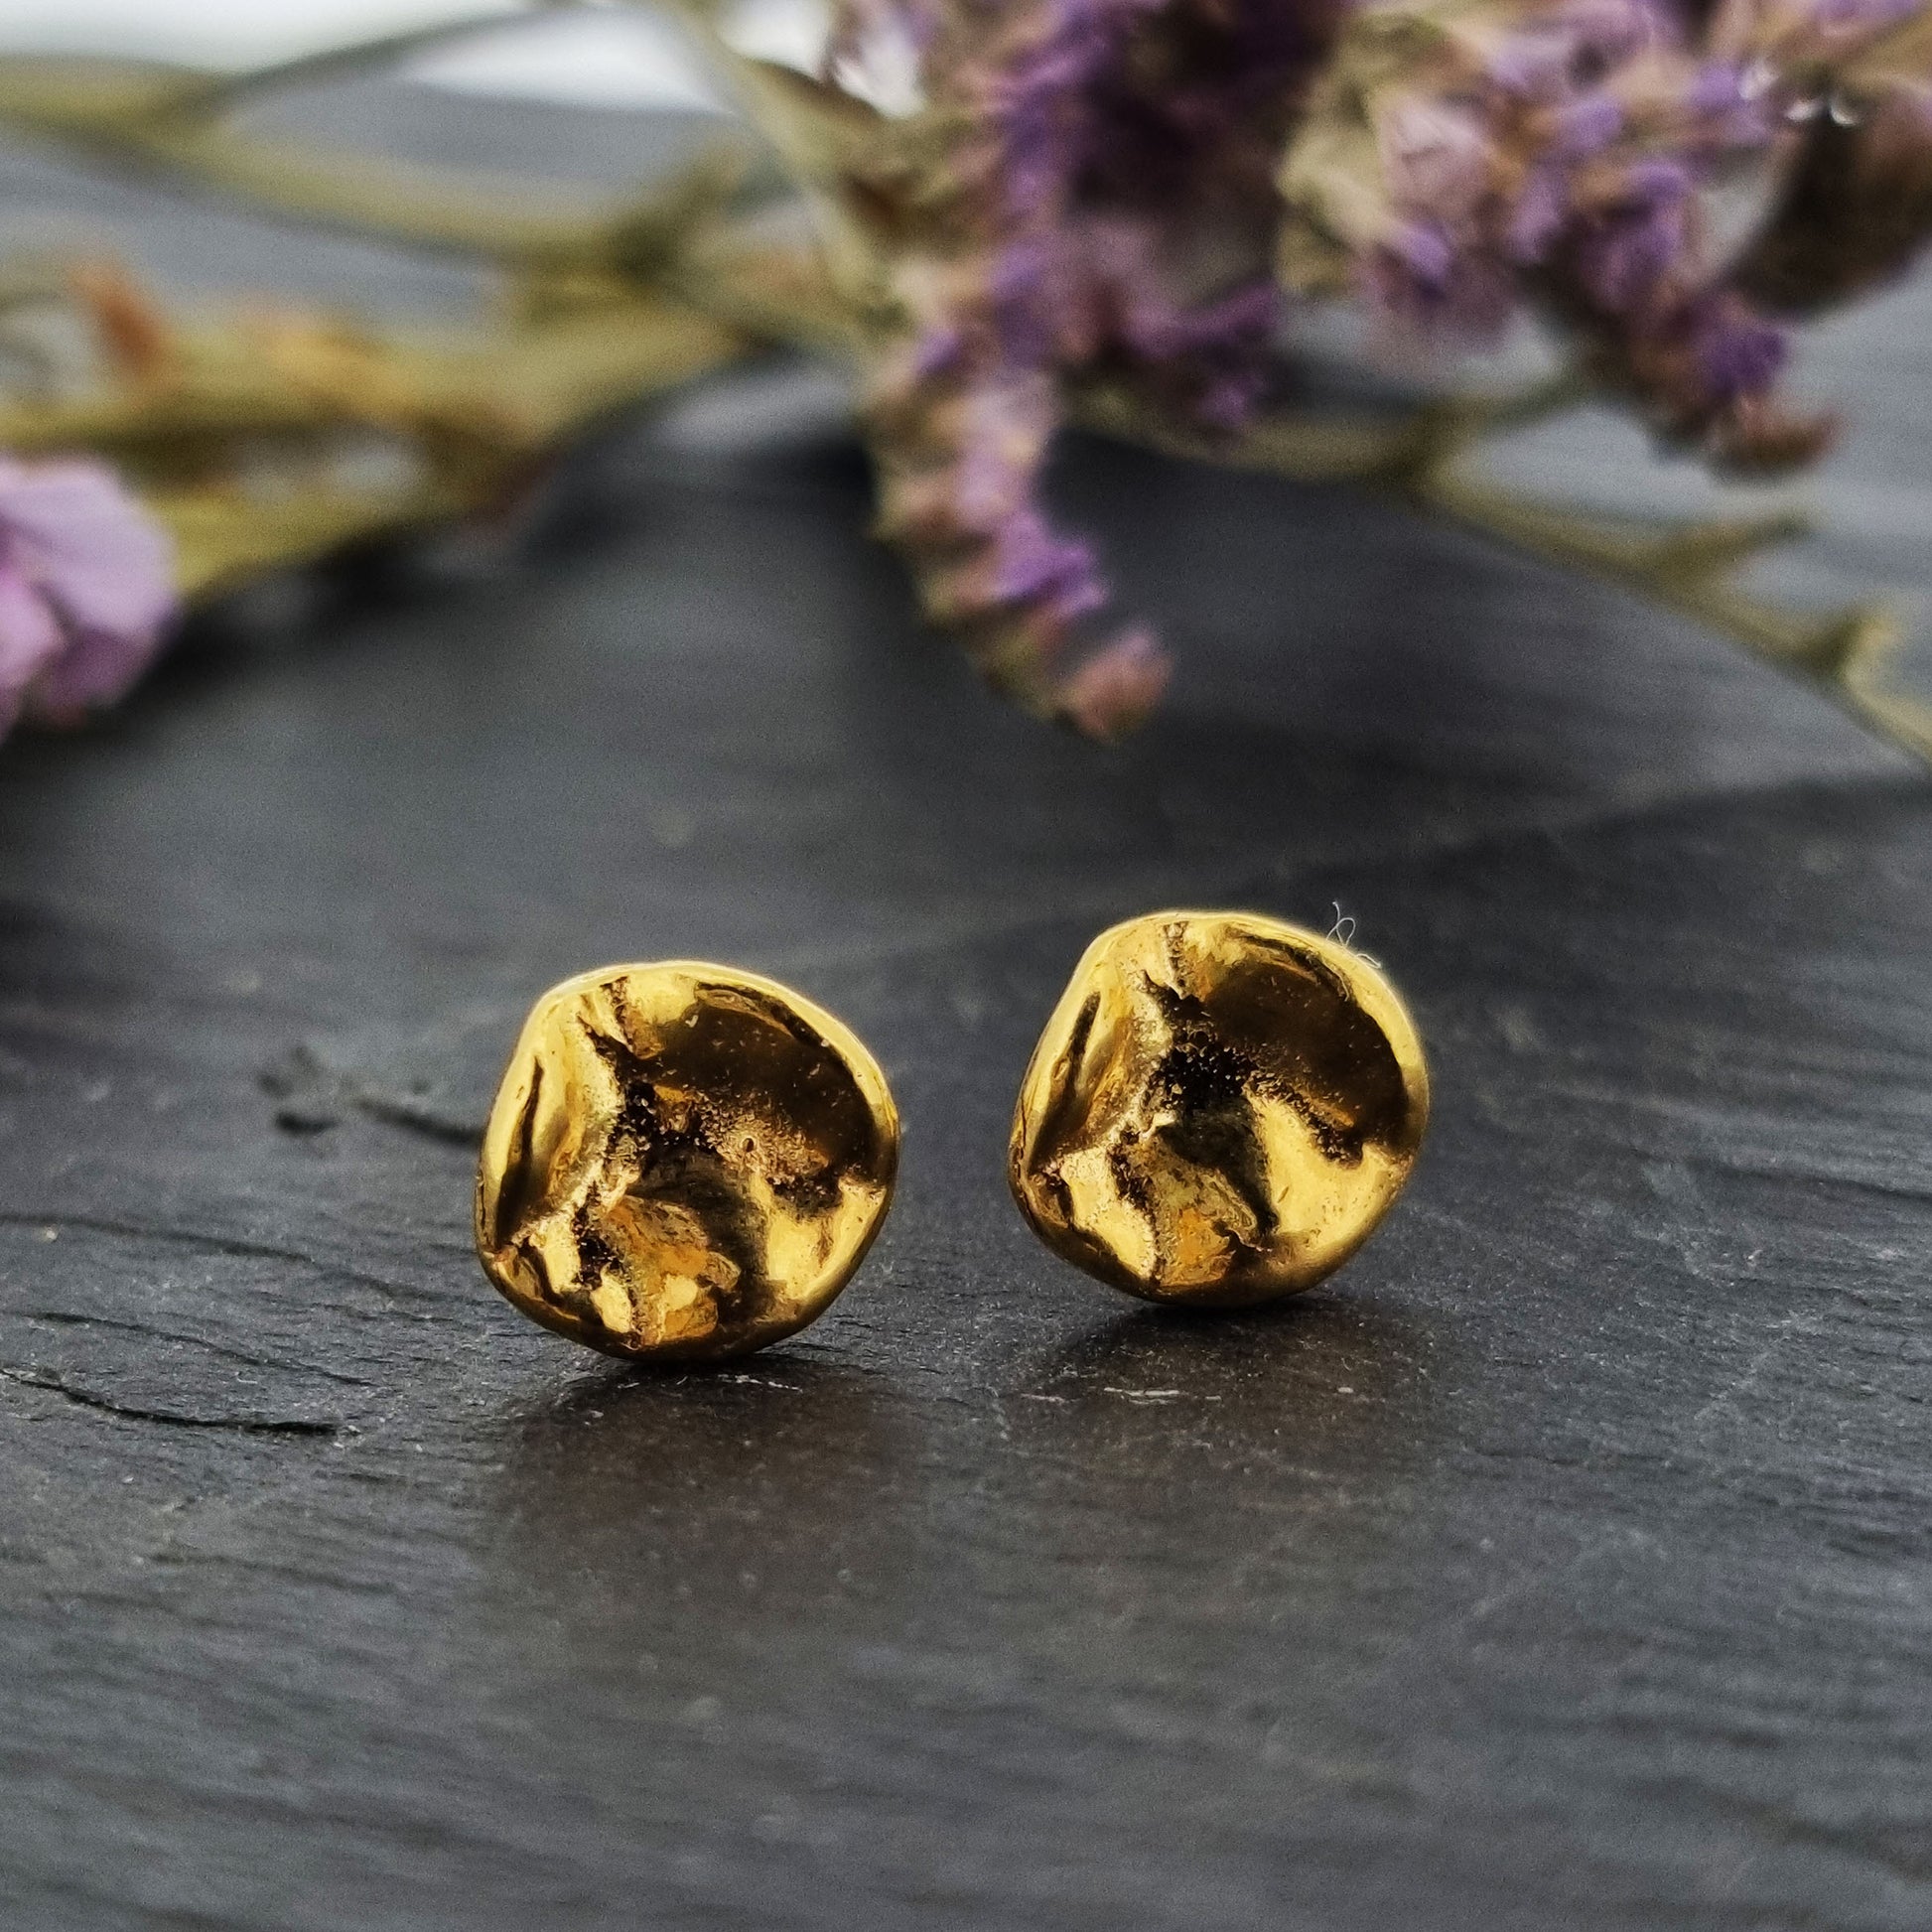 Yellow gold vermeil round stud earrings with a crumpled textured surface. Pictured with purple flowers.